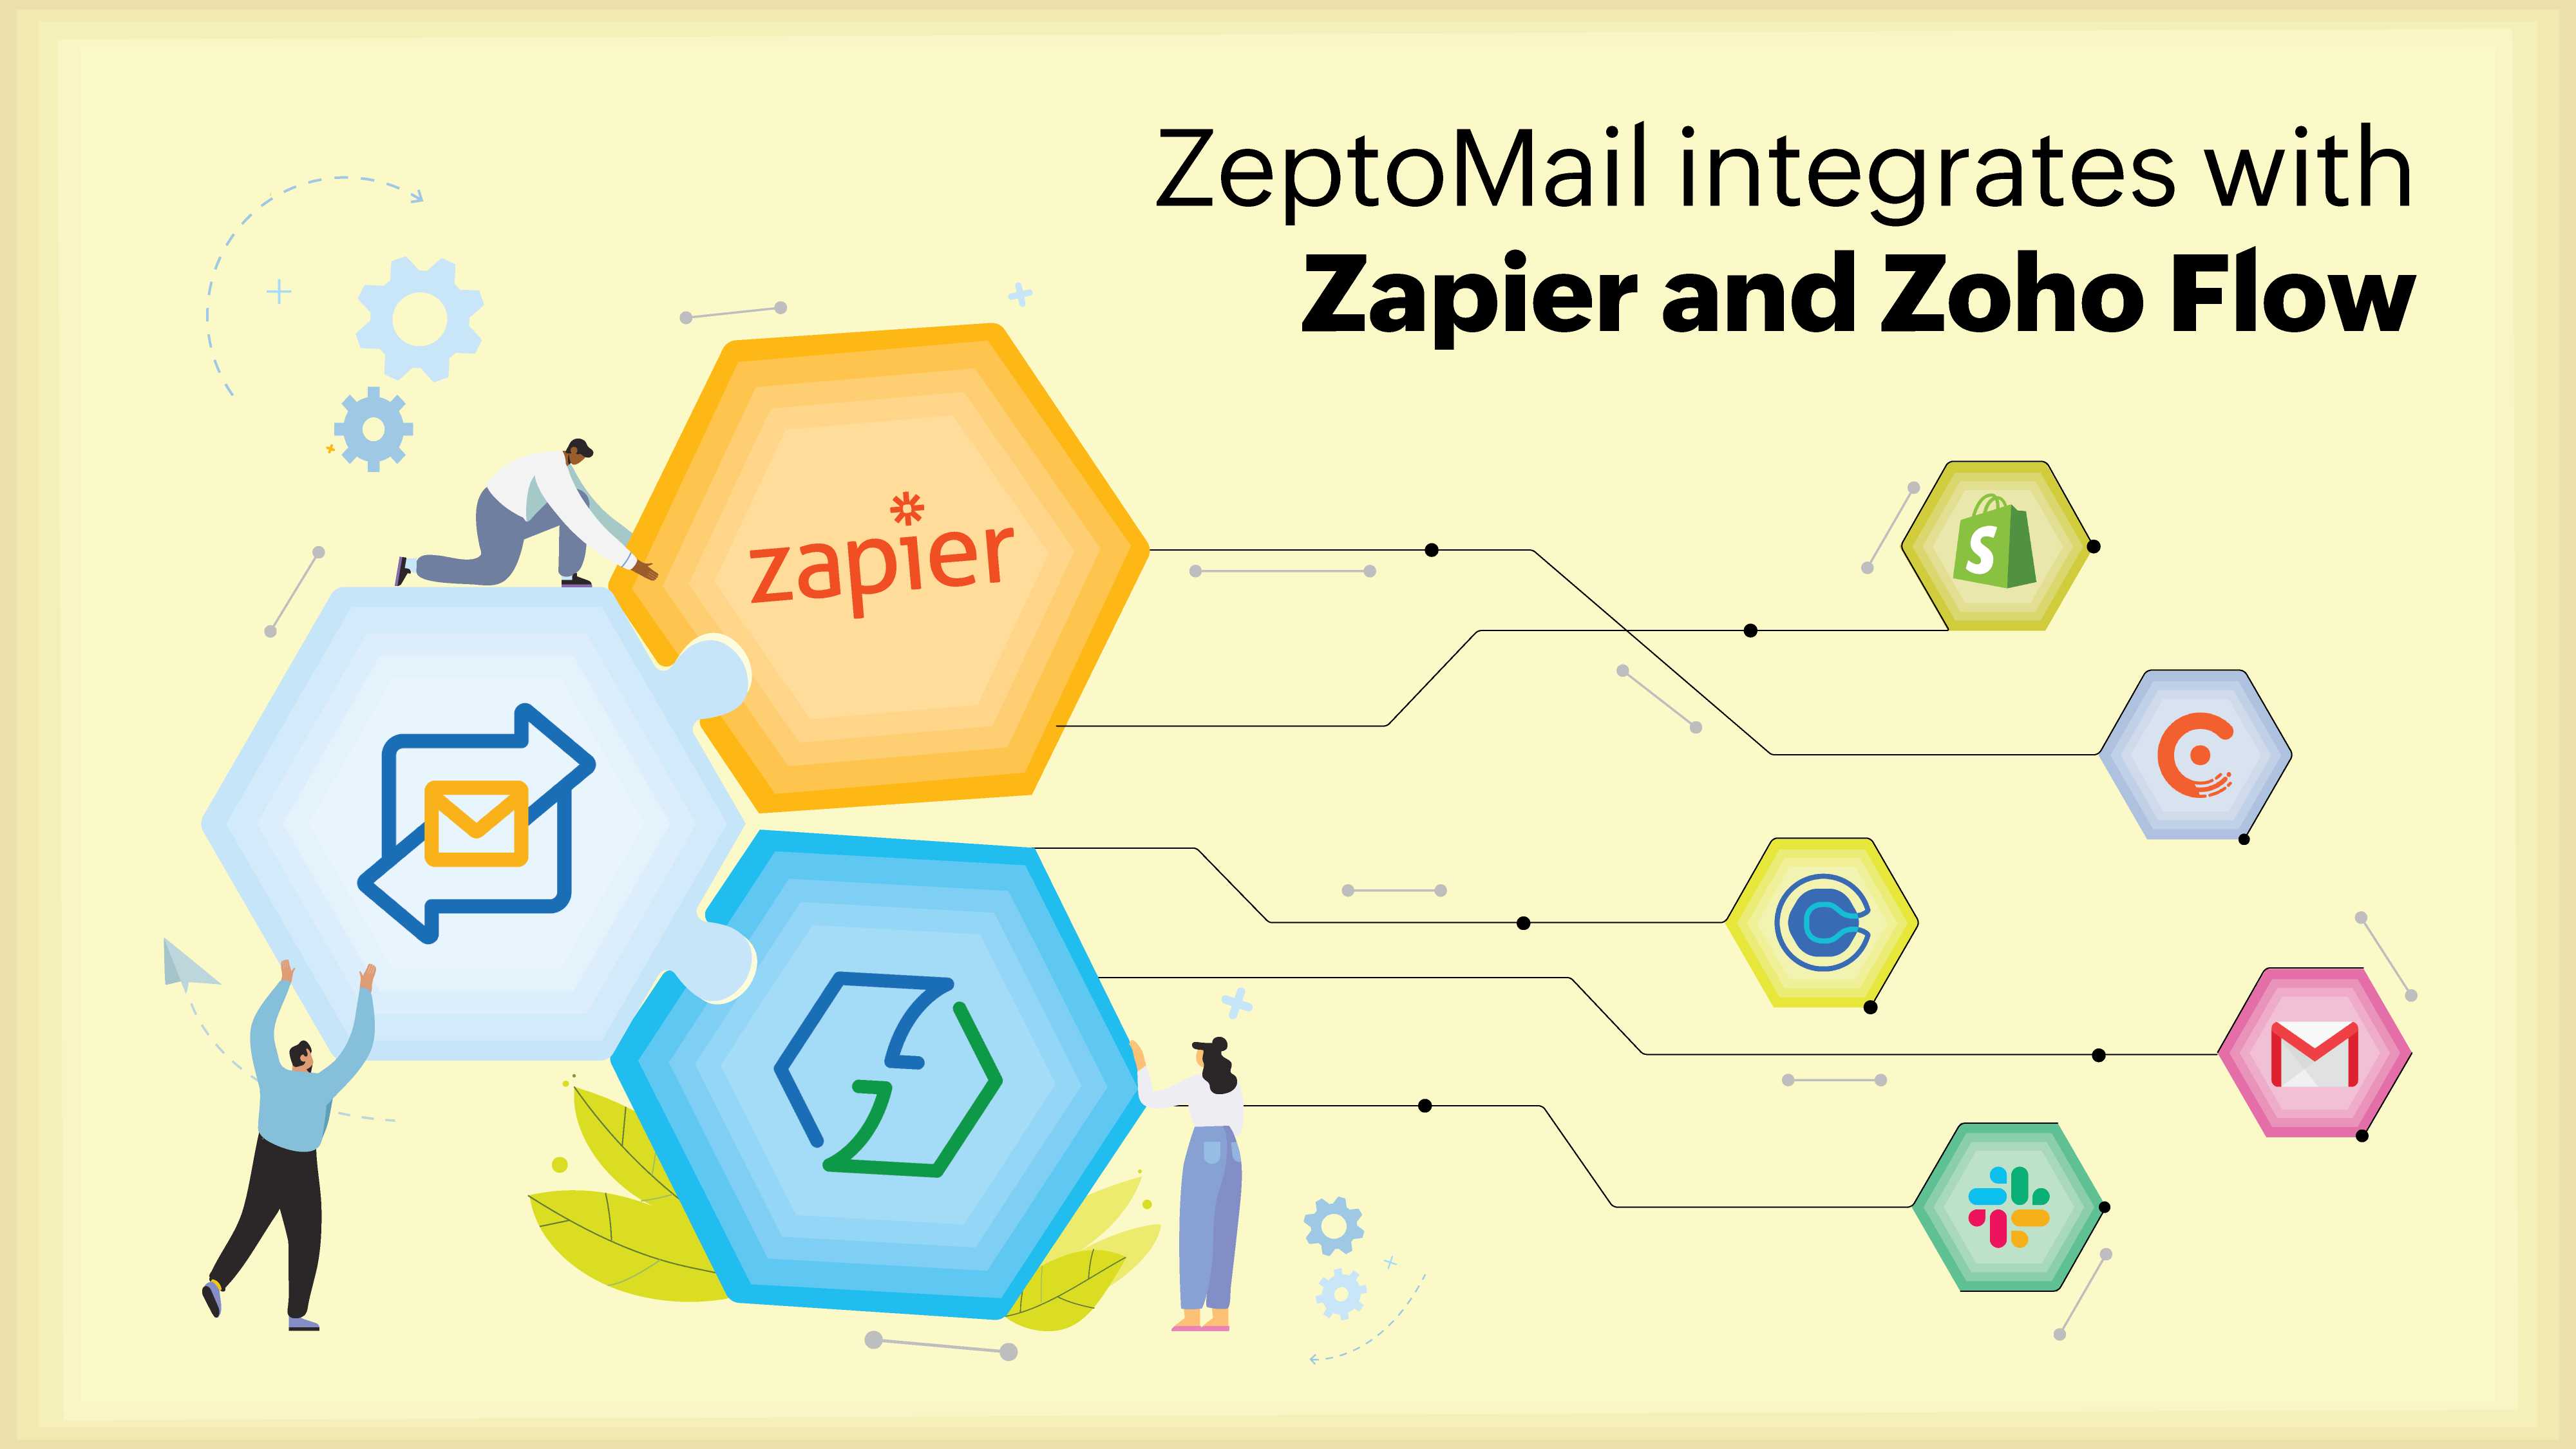 Introducing ZeptoMail's integration with Zapier and Zoho Flow